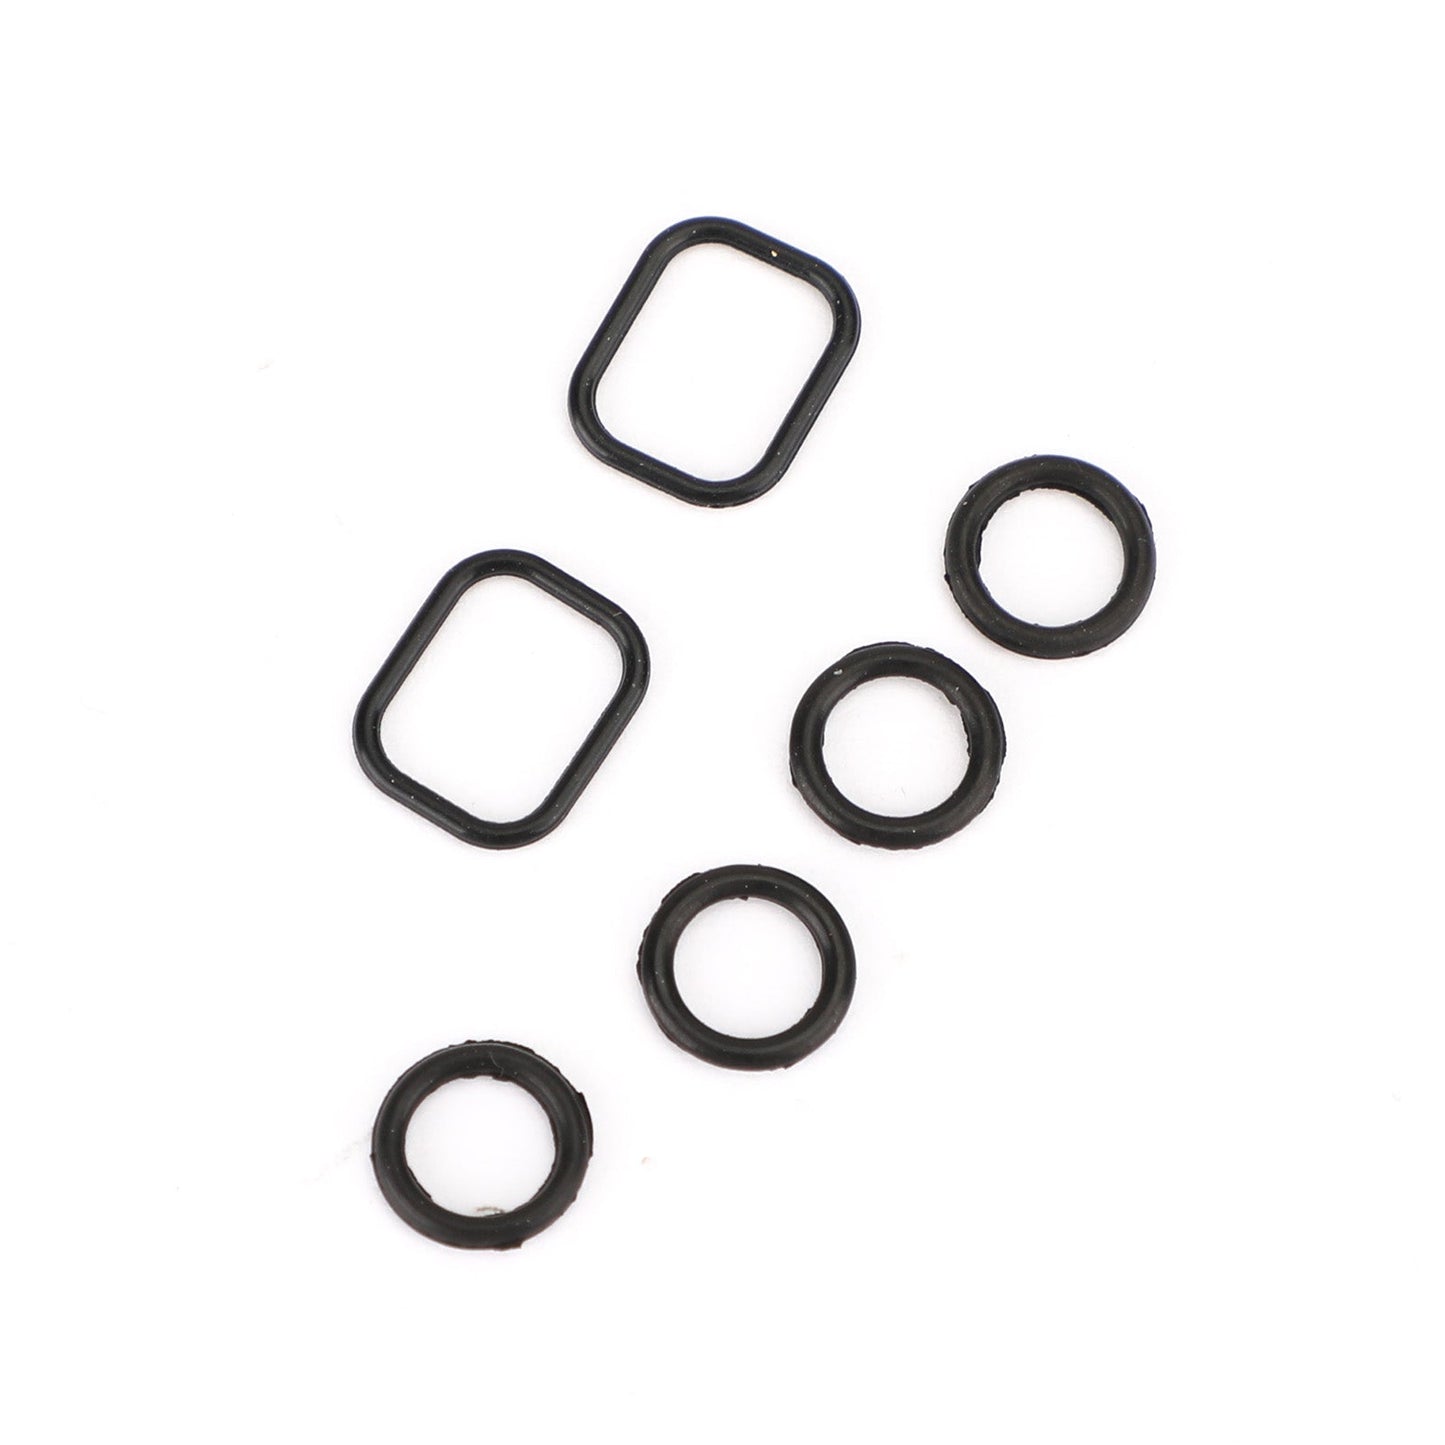 Carburetor Repair Package Oil Cup Gasket fit for YZ250F YZ450F WR250F WR450F